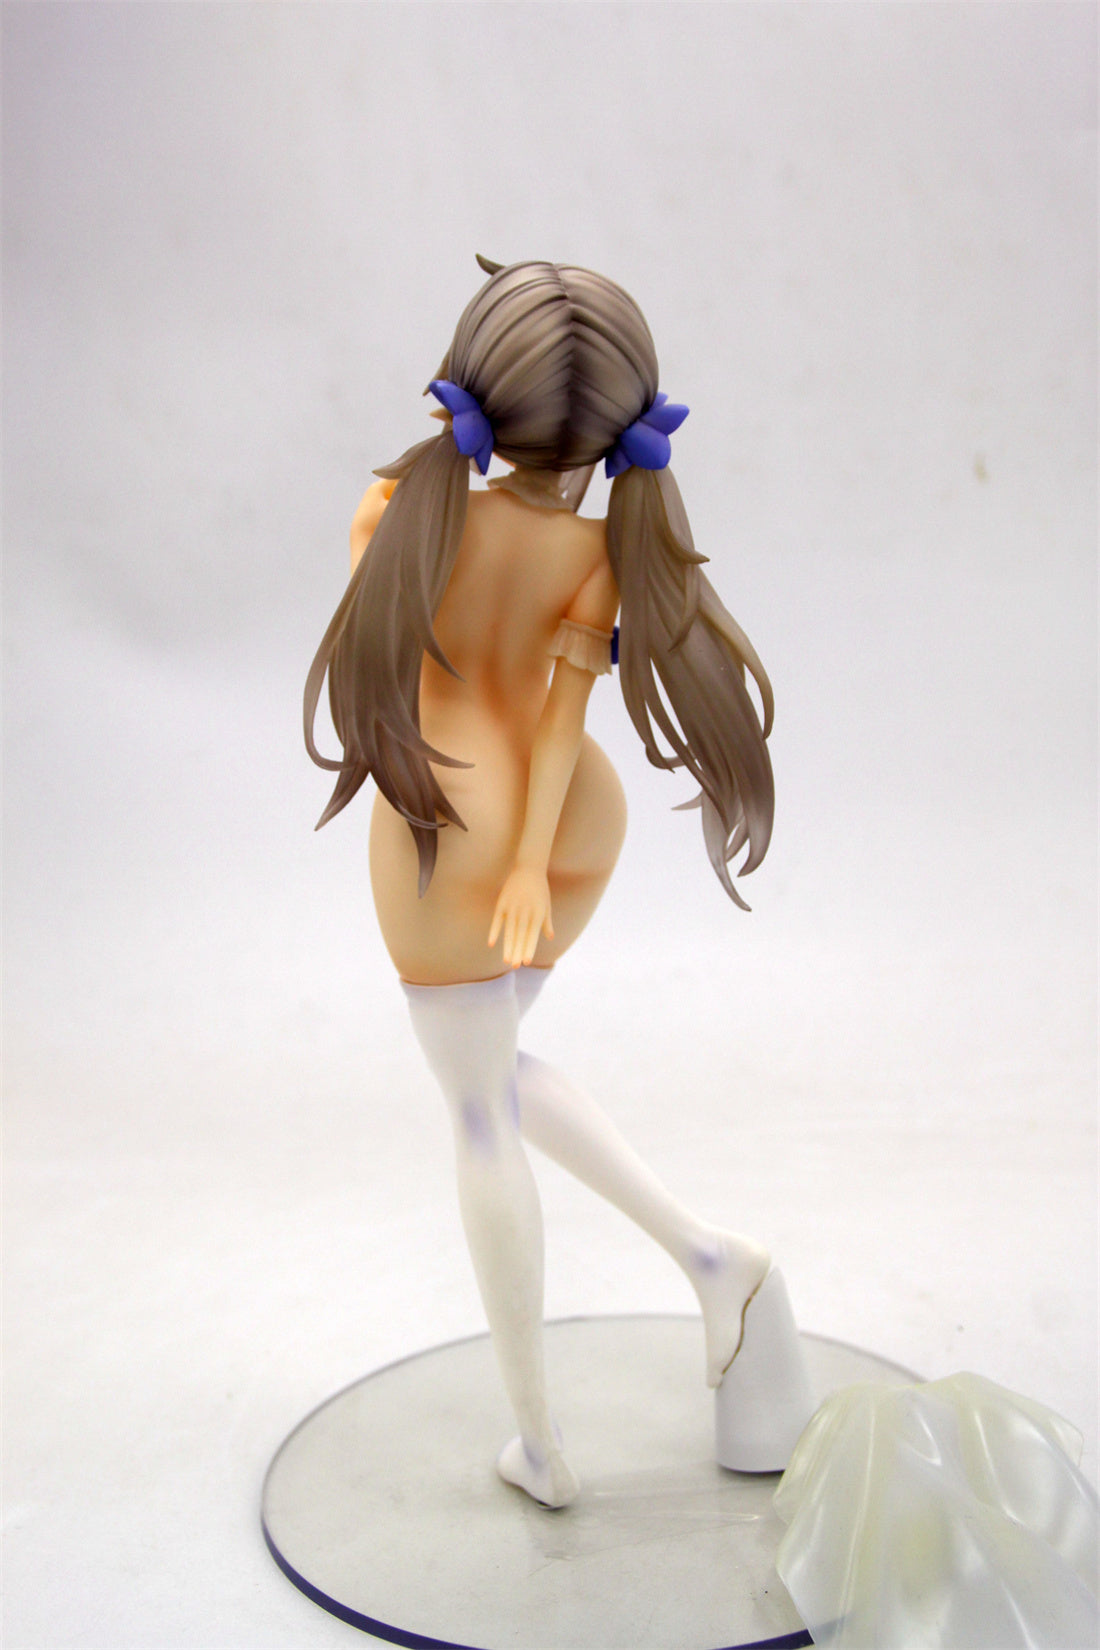 Original - Pure White Erof 1/6 collectible action figures naked anime figures